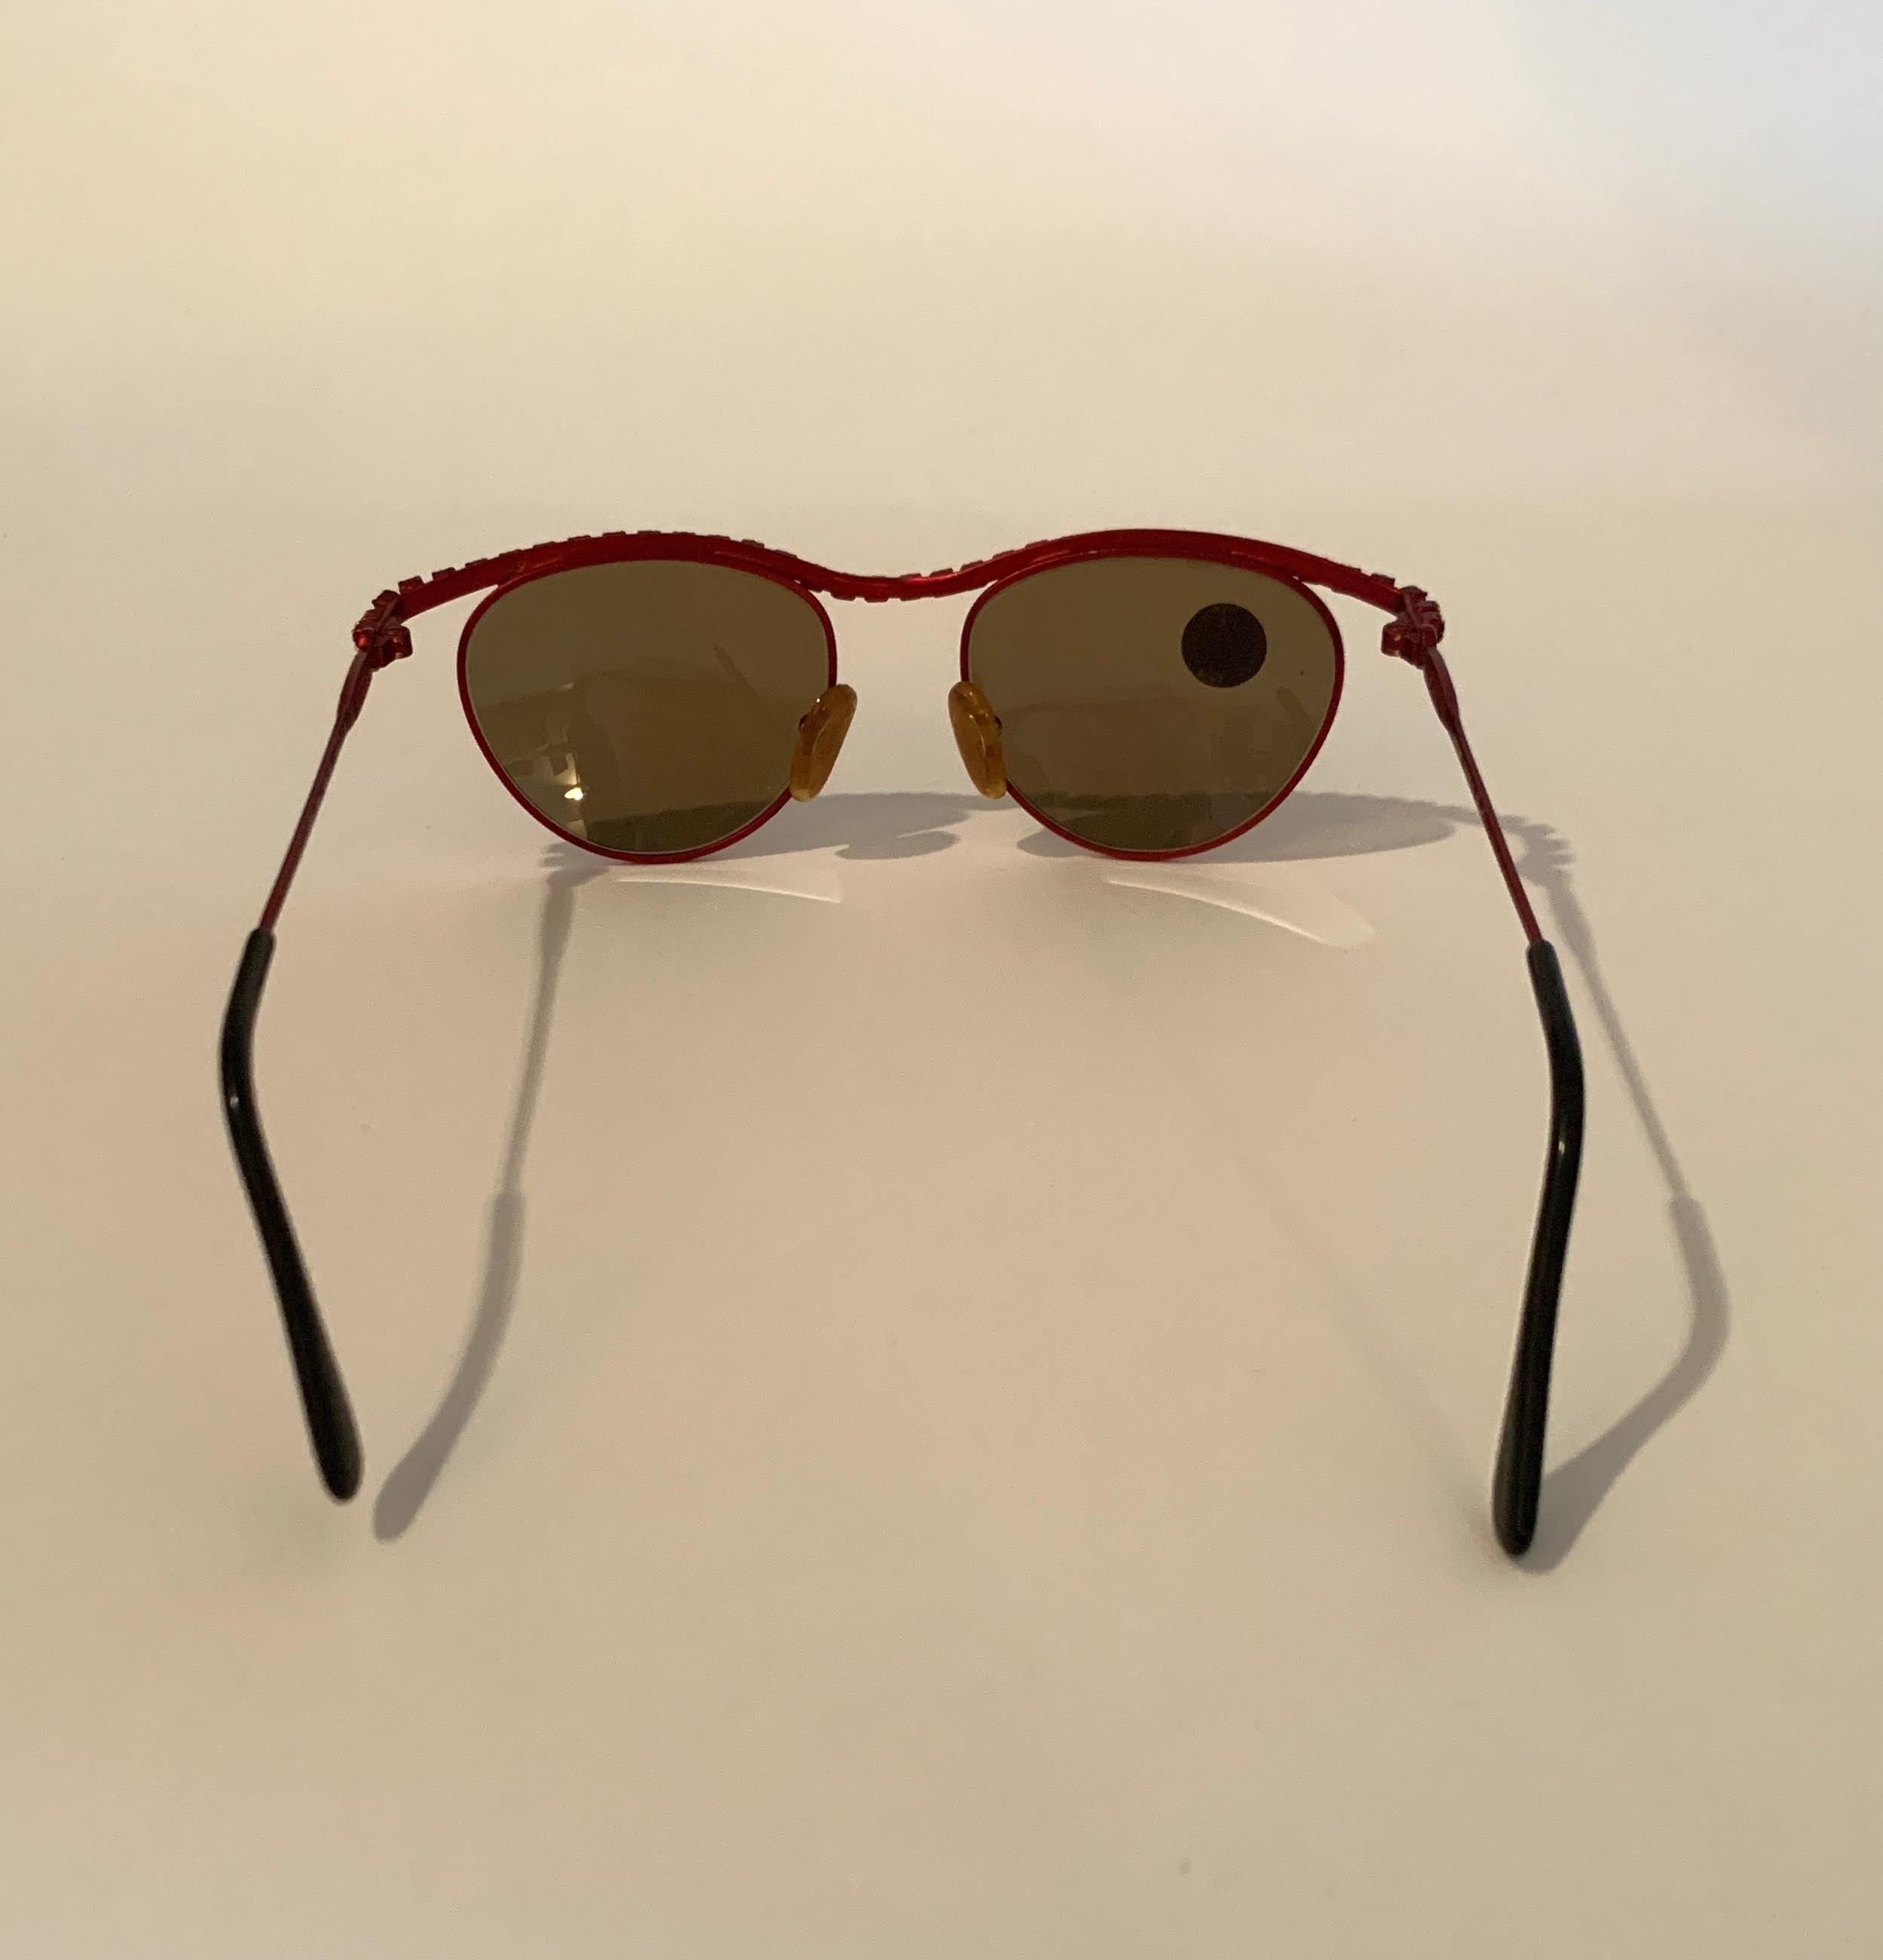 Vintage Moschino 1990s Red Metal and Rhinestone Sunglasses by Persol In Good Condition For Sale In San Francisco, CA